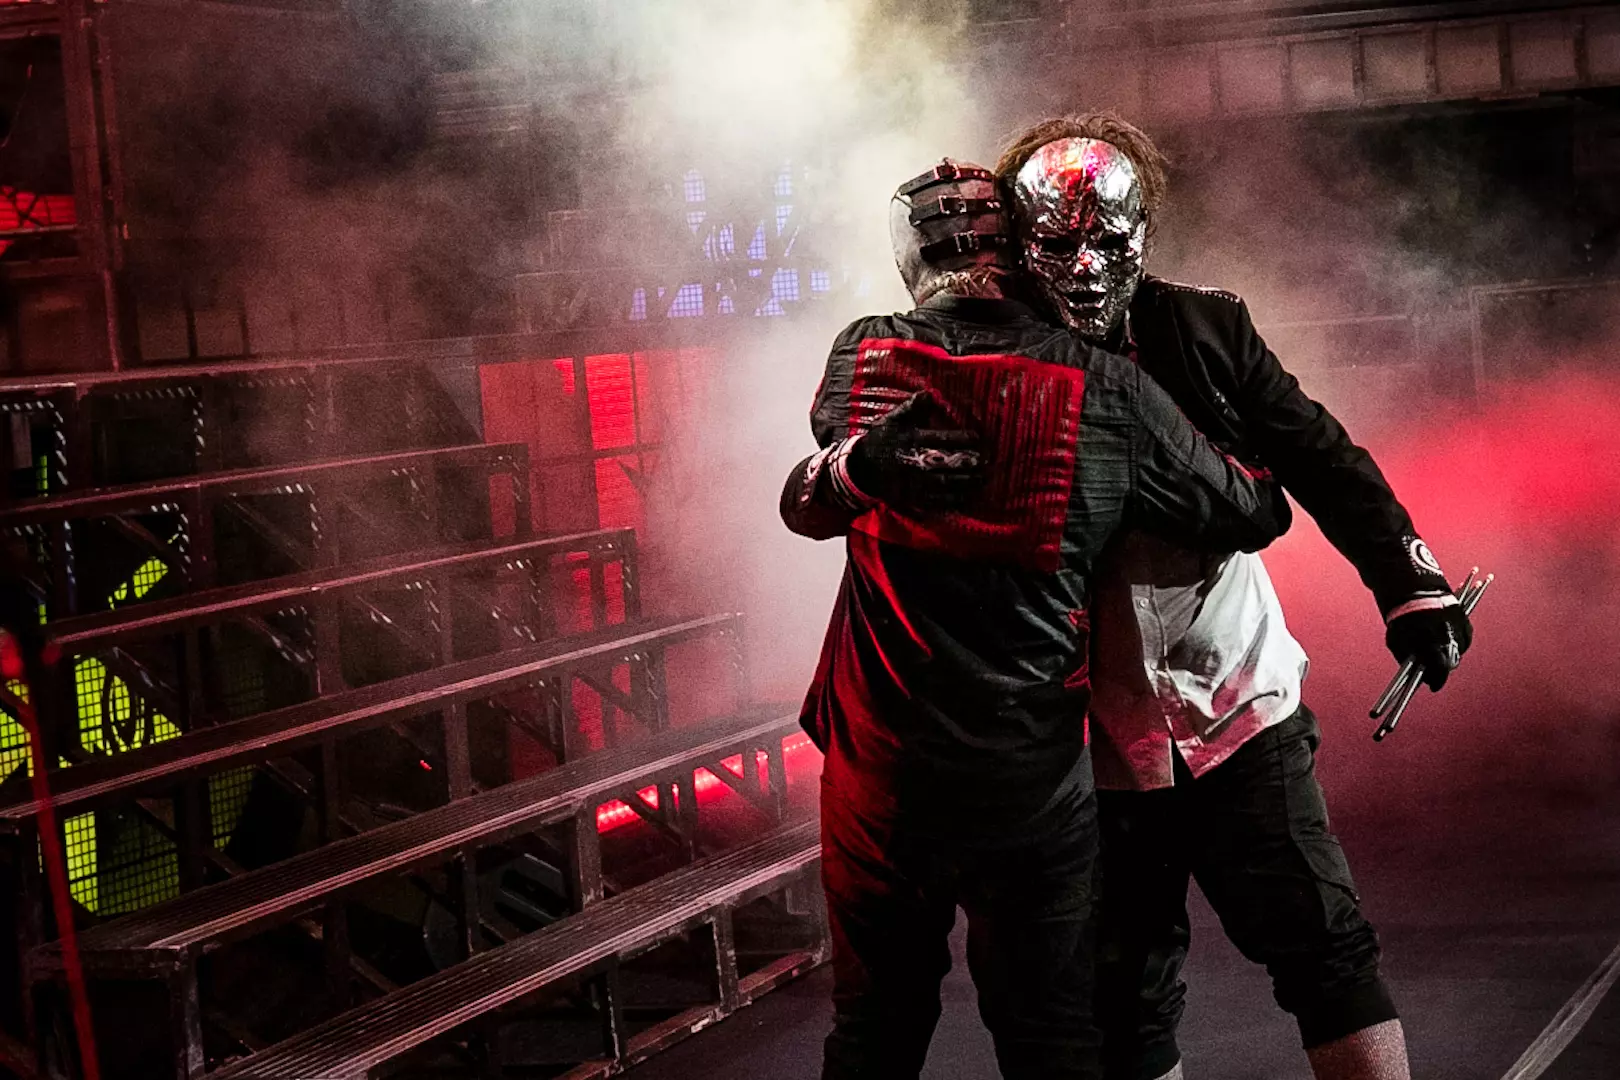 SLIPKNOT's COREY TAYLOR: Maybe I've got another 5 years left of physically  touring like this